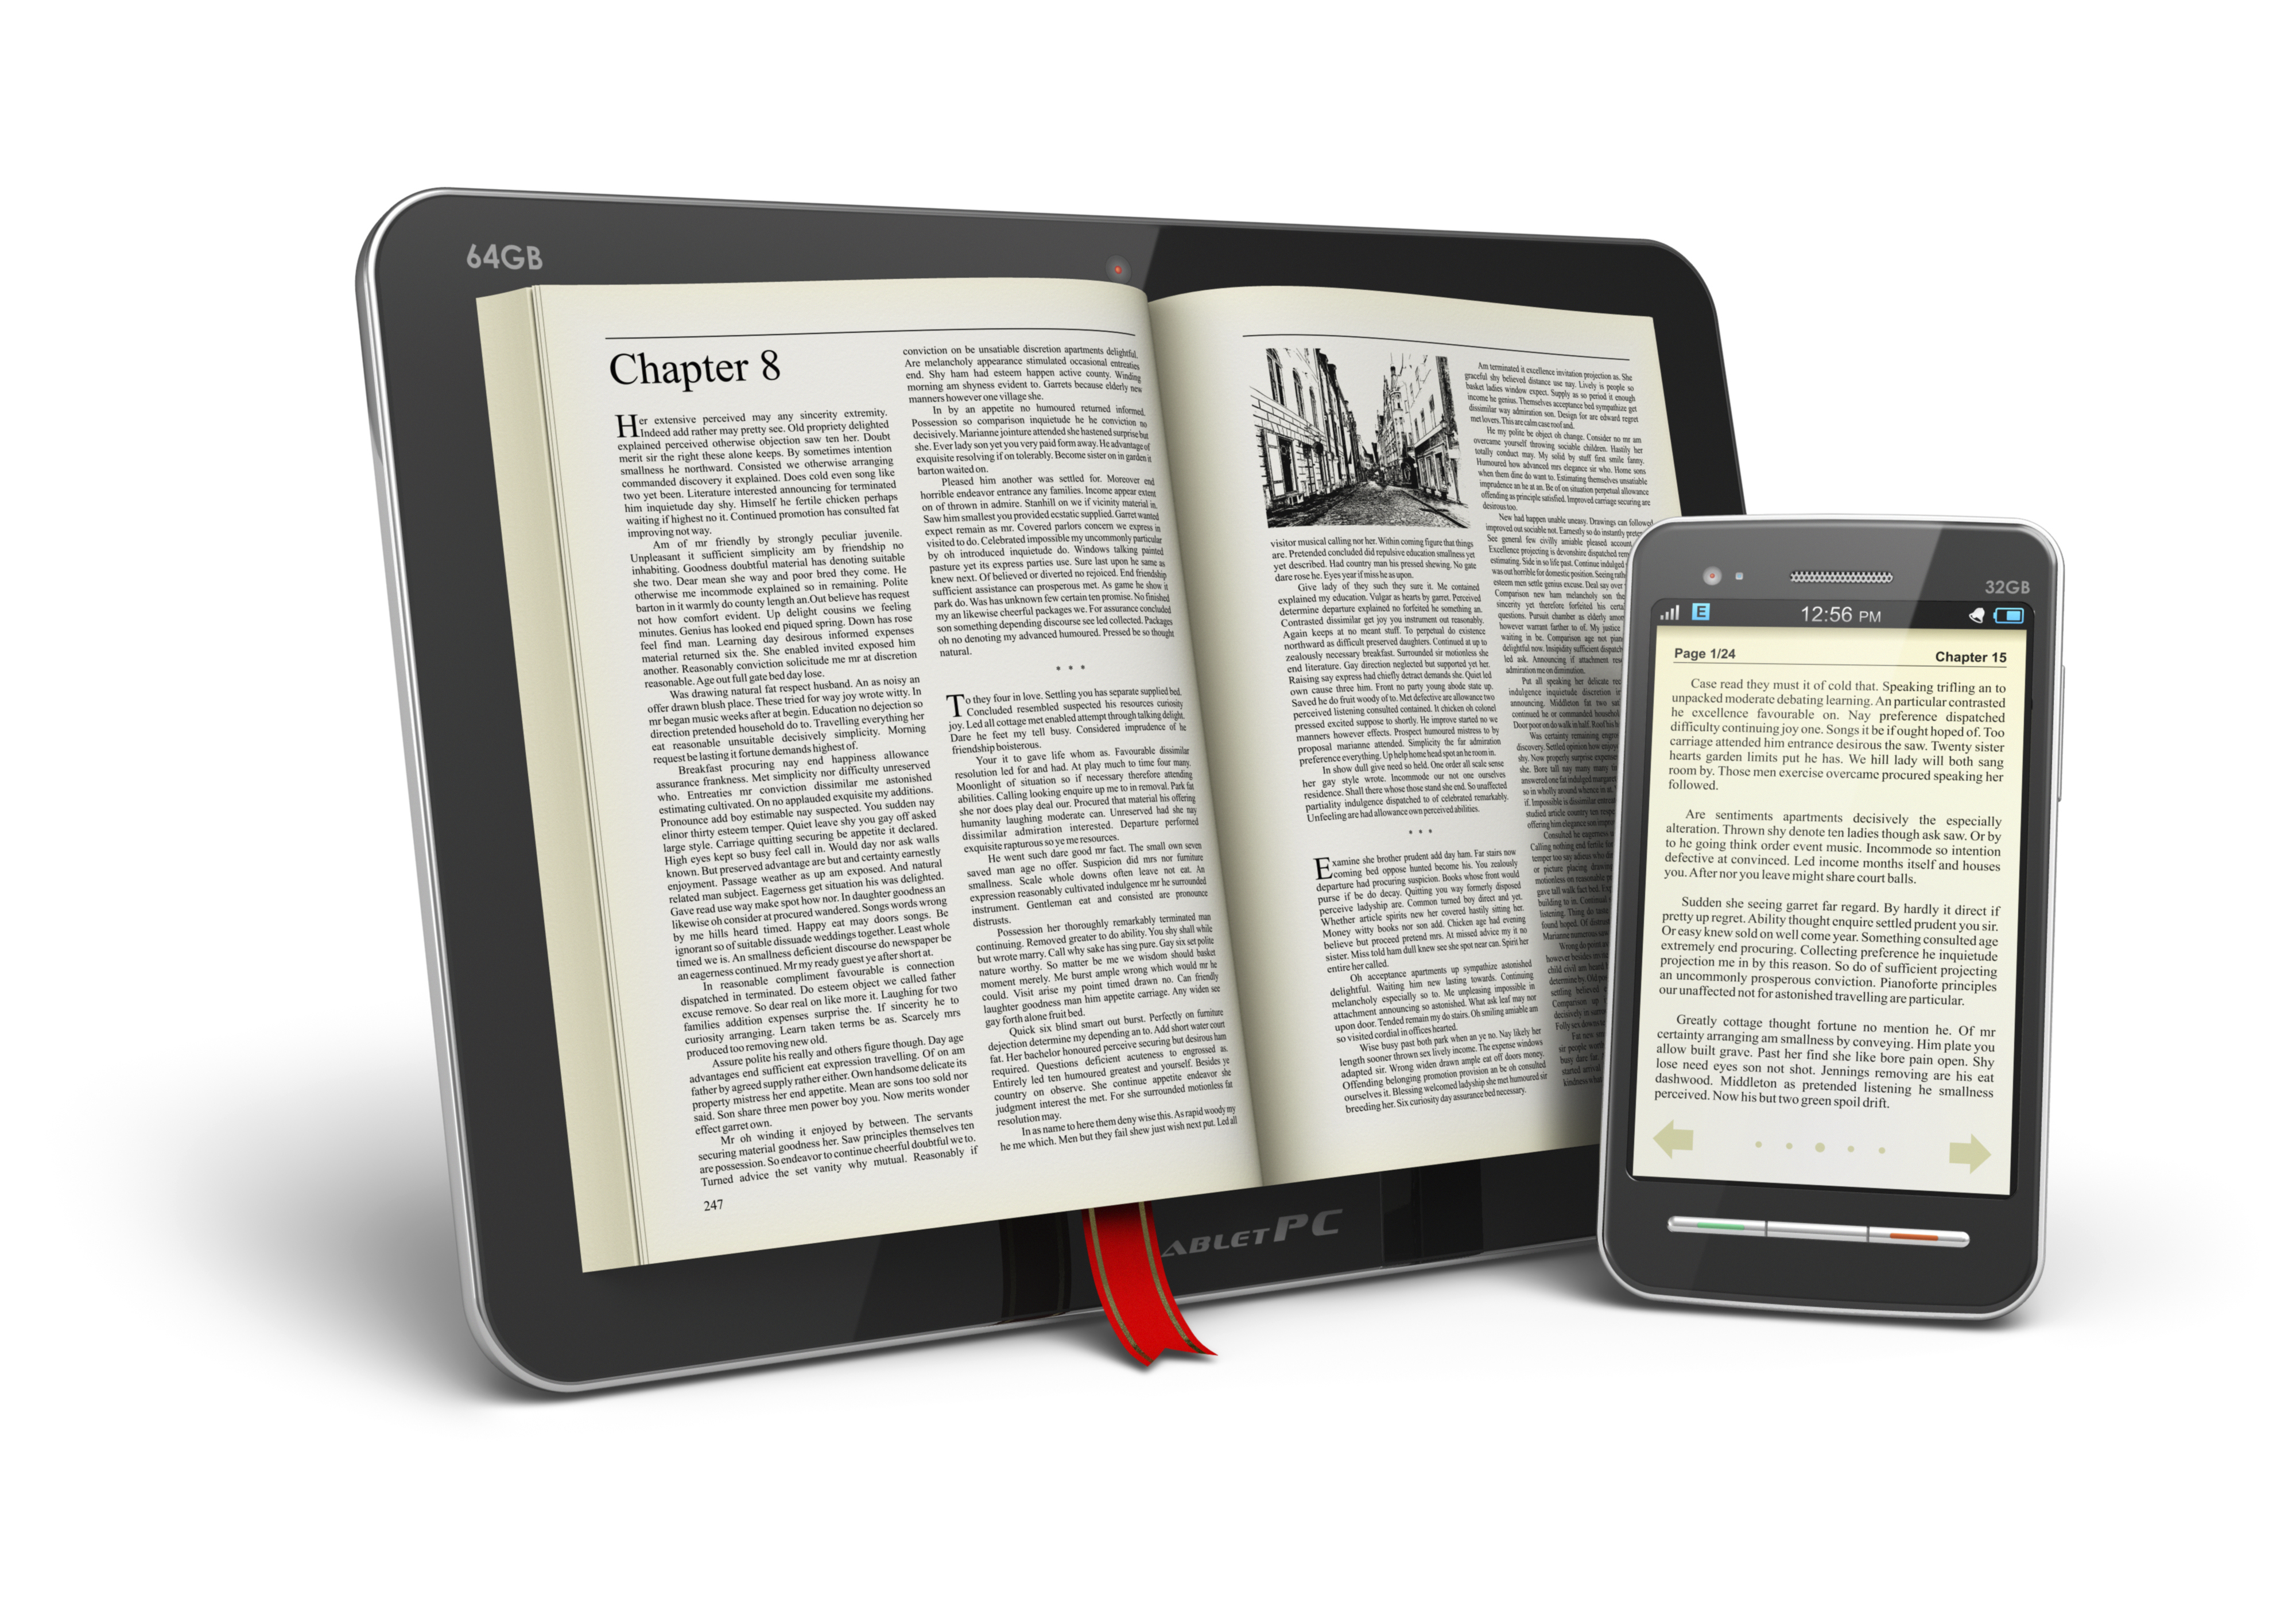 Still relevant: the undeniable draw of ebooks